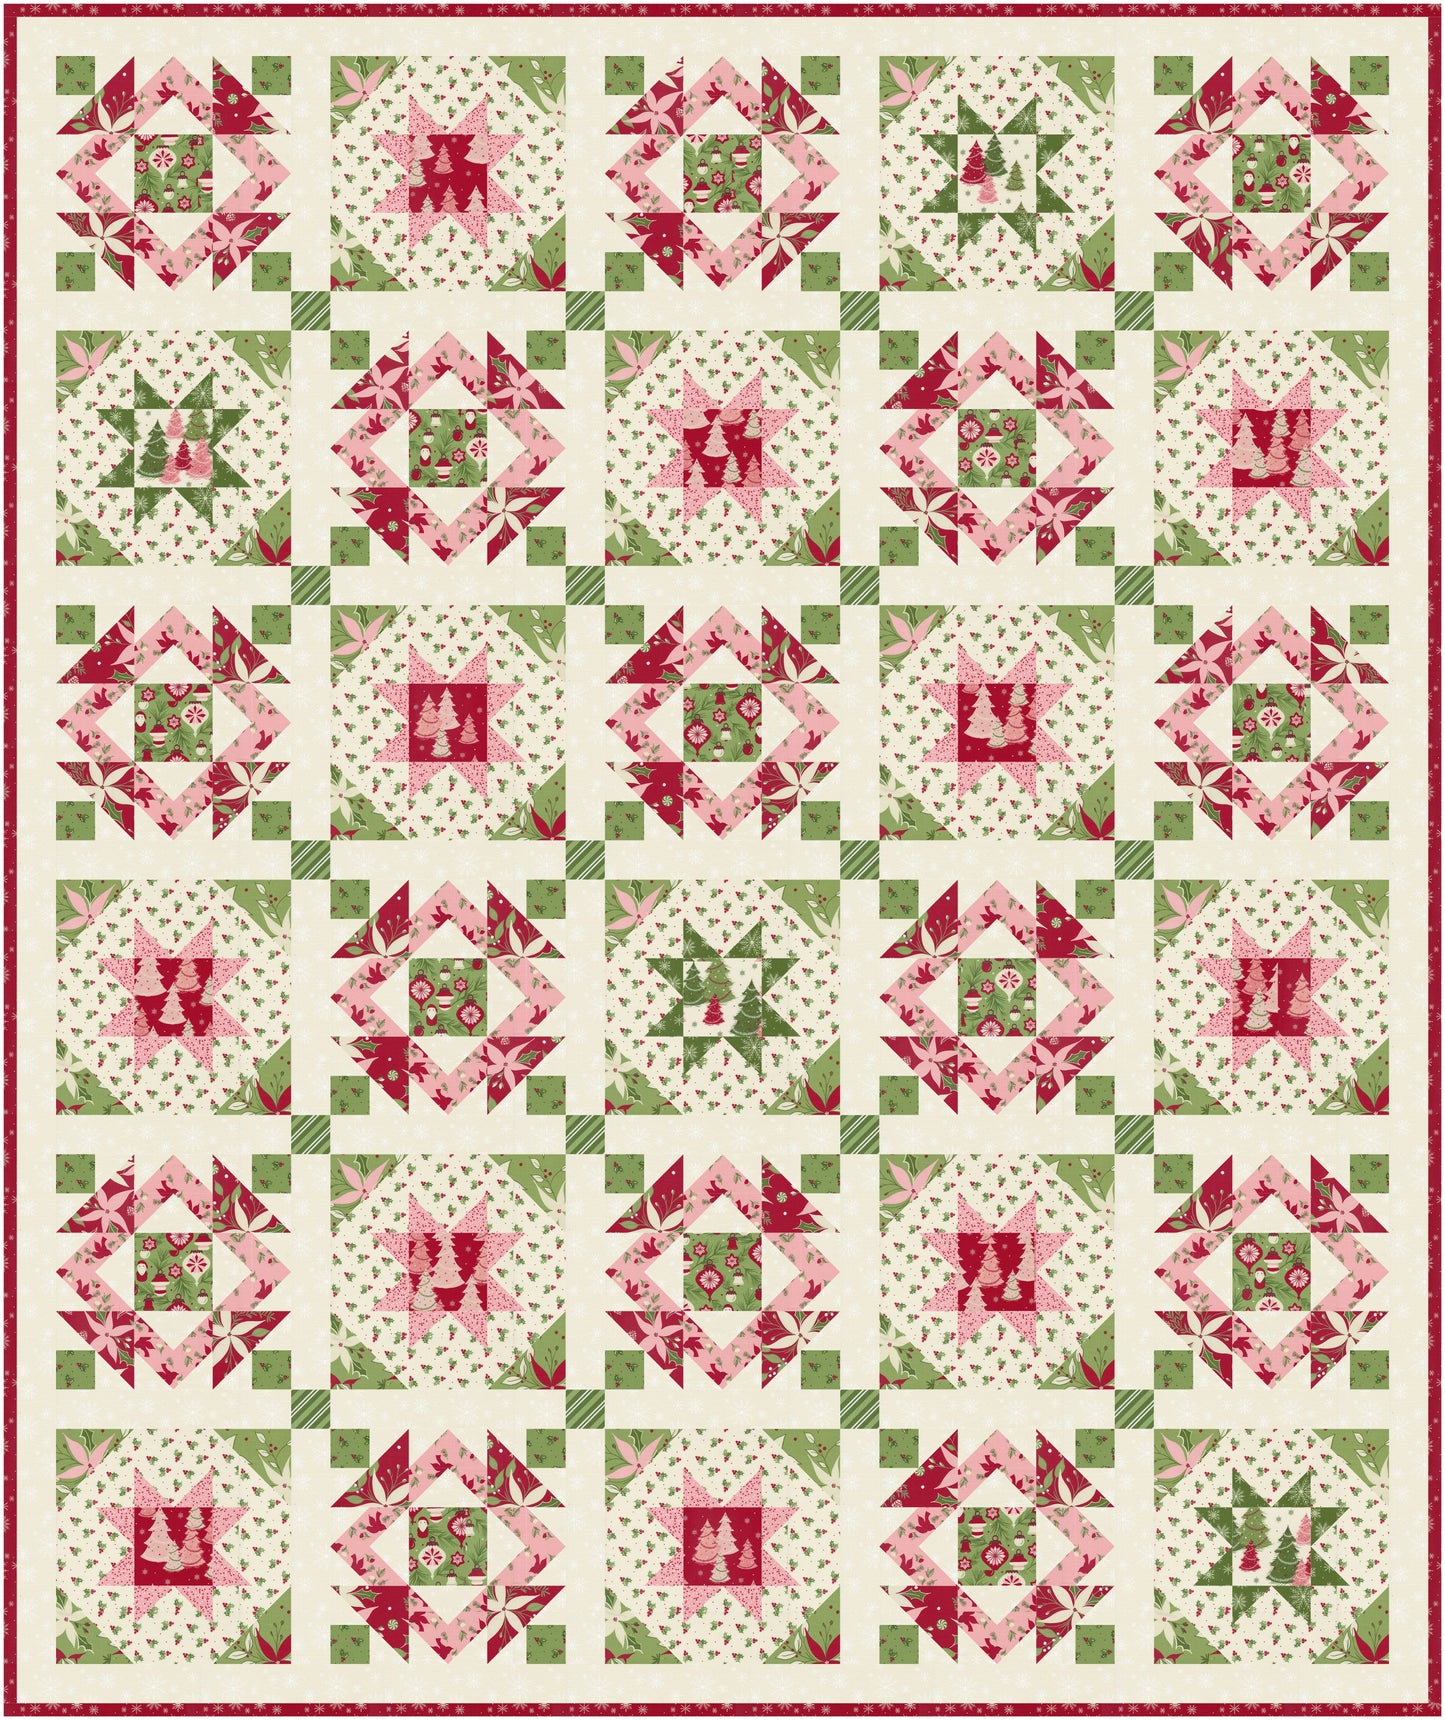 NEW! Once Upon a Christmas "Gather 'Round" Quilt Pattern (Downloadable PDF)